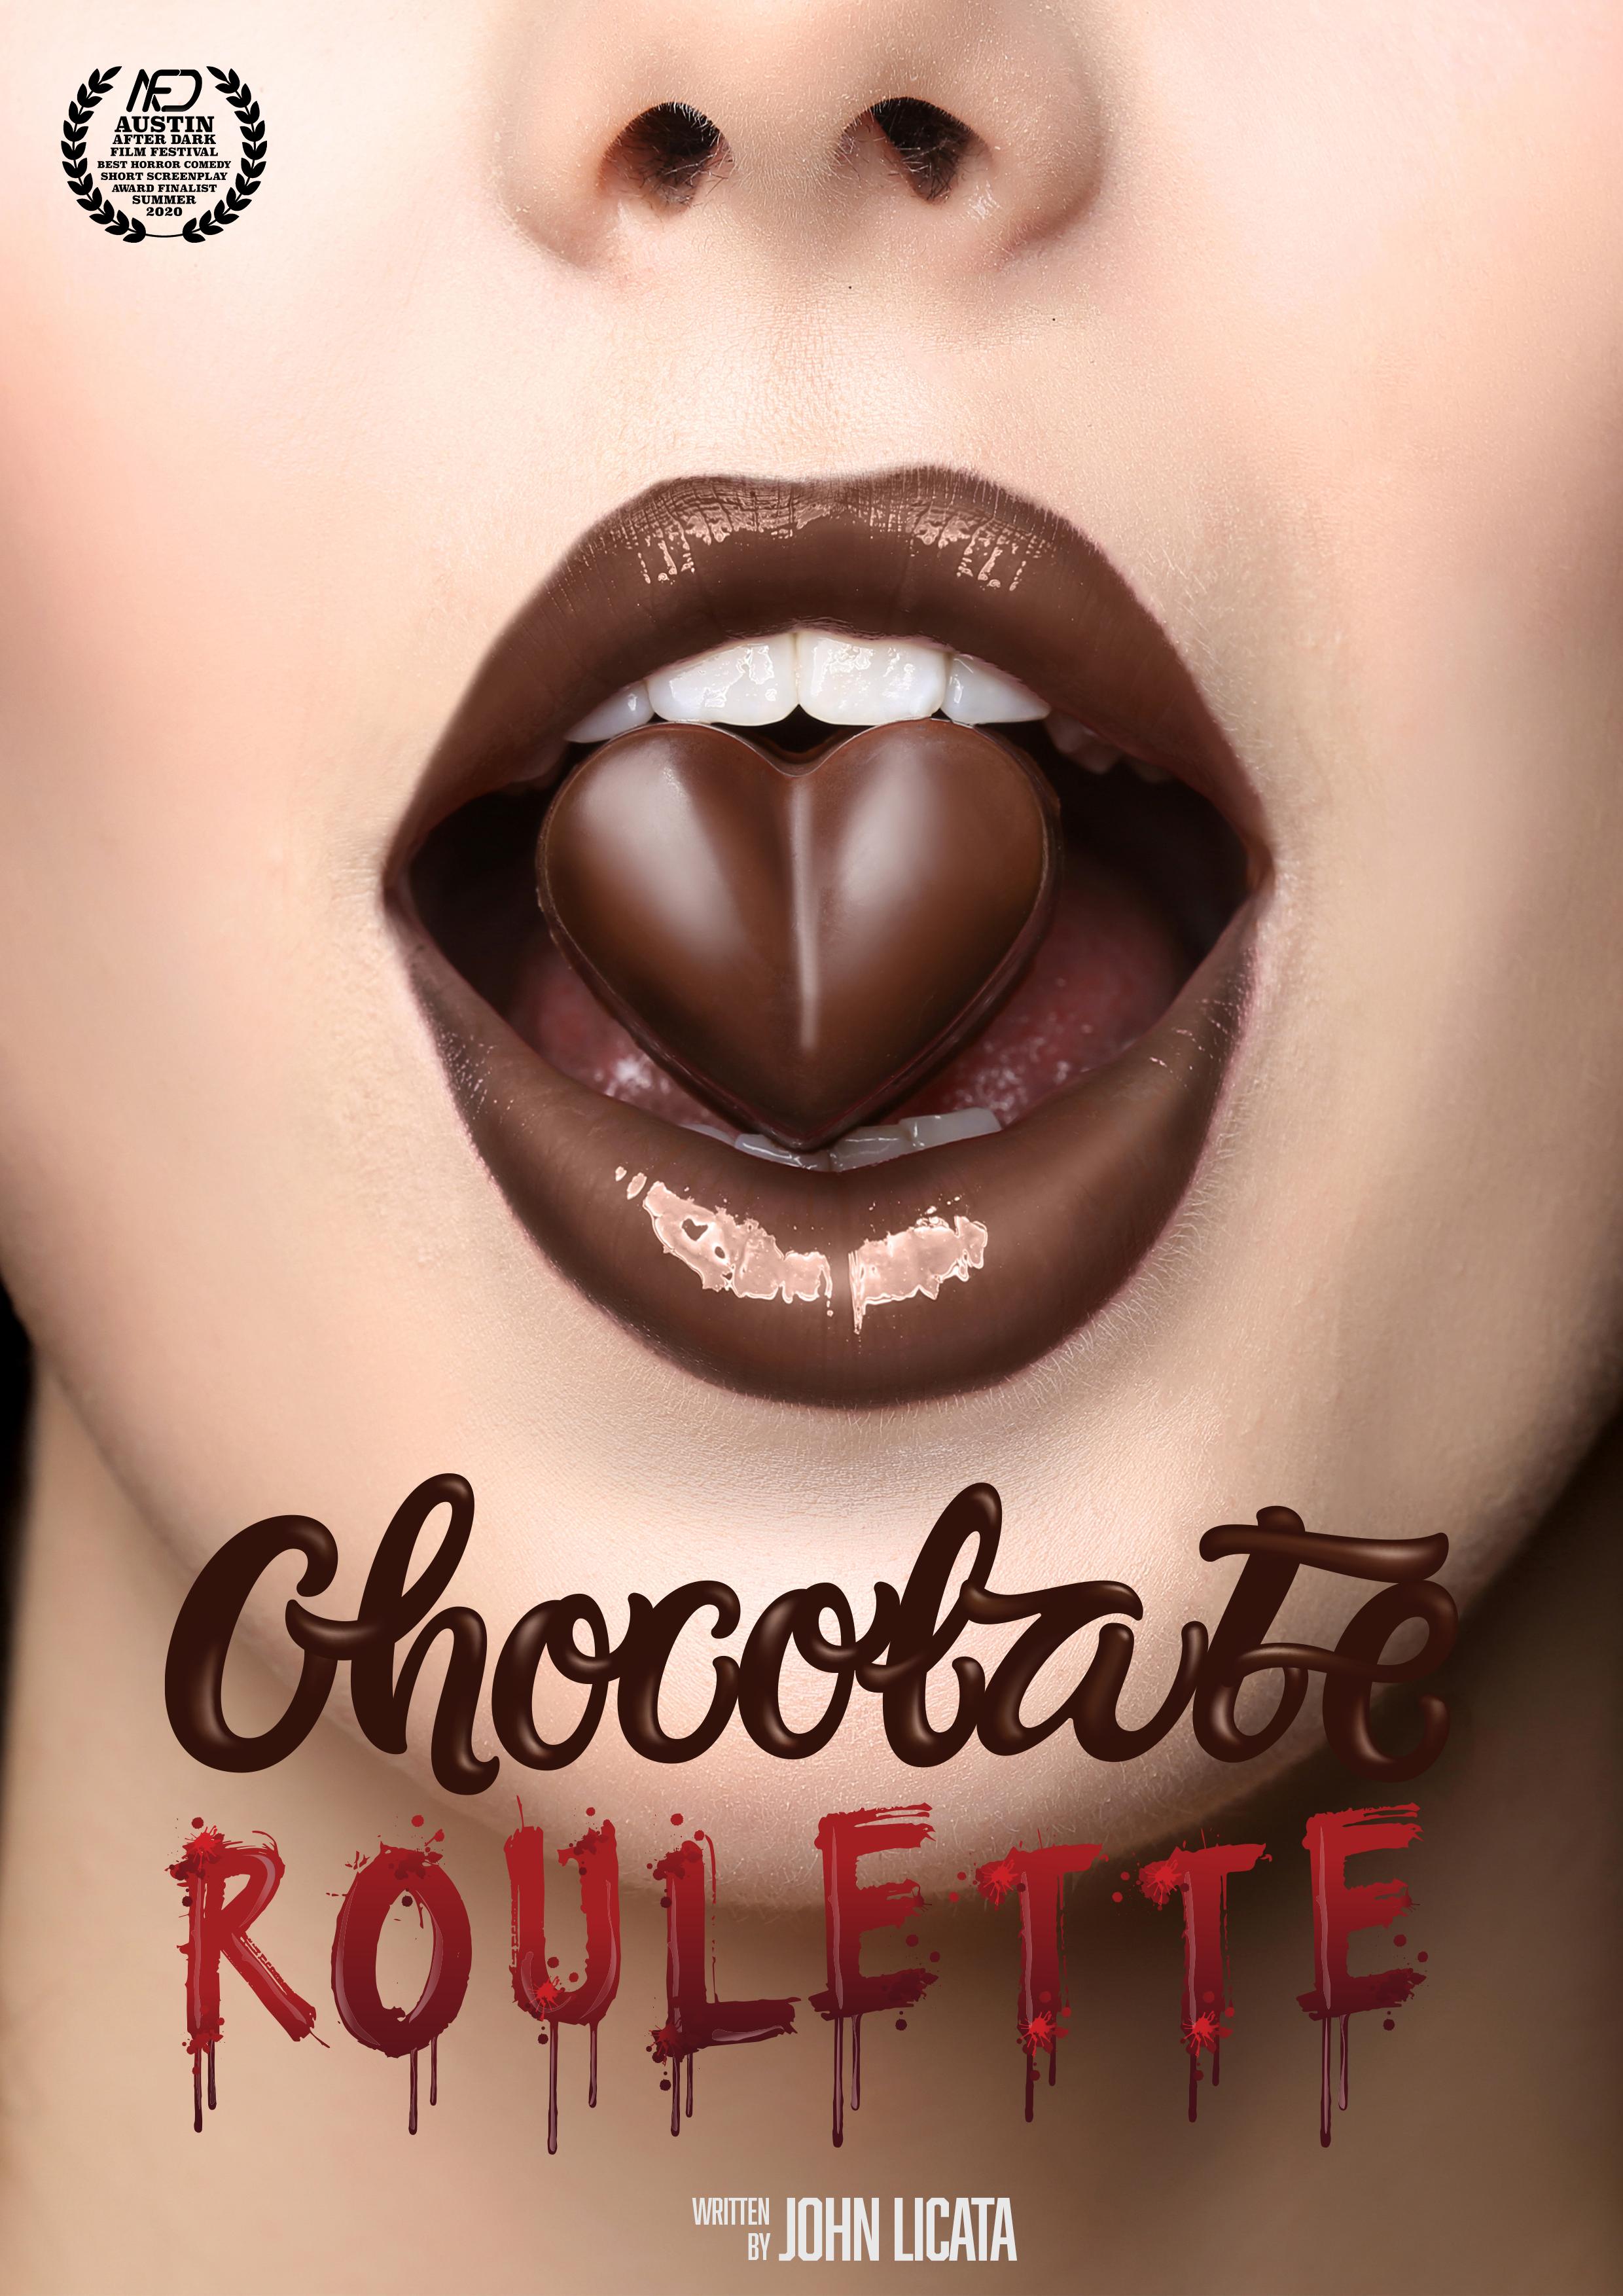 Chocolate Roulette (2021)